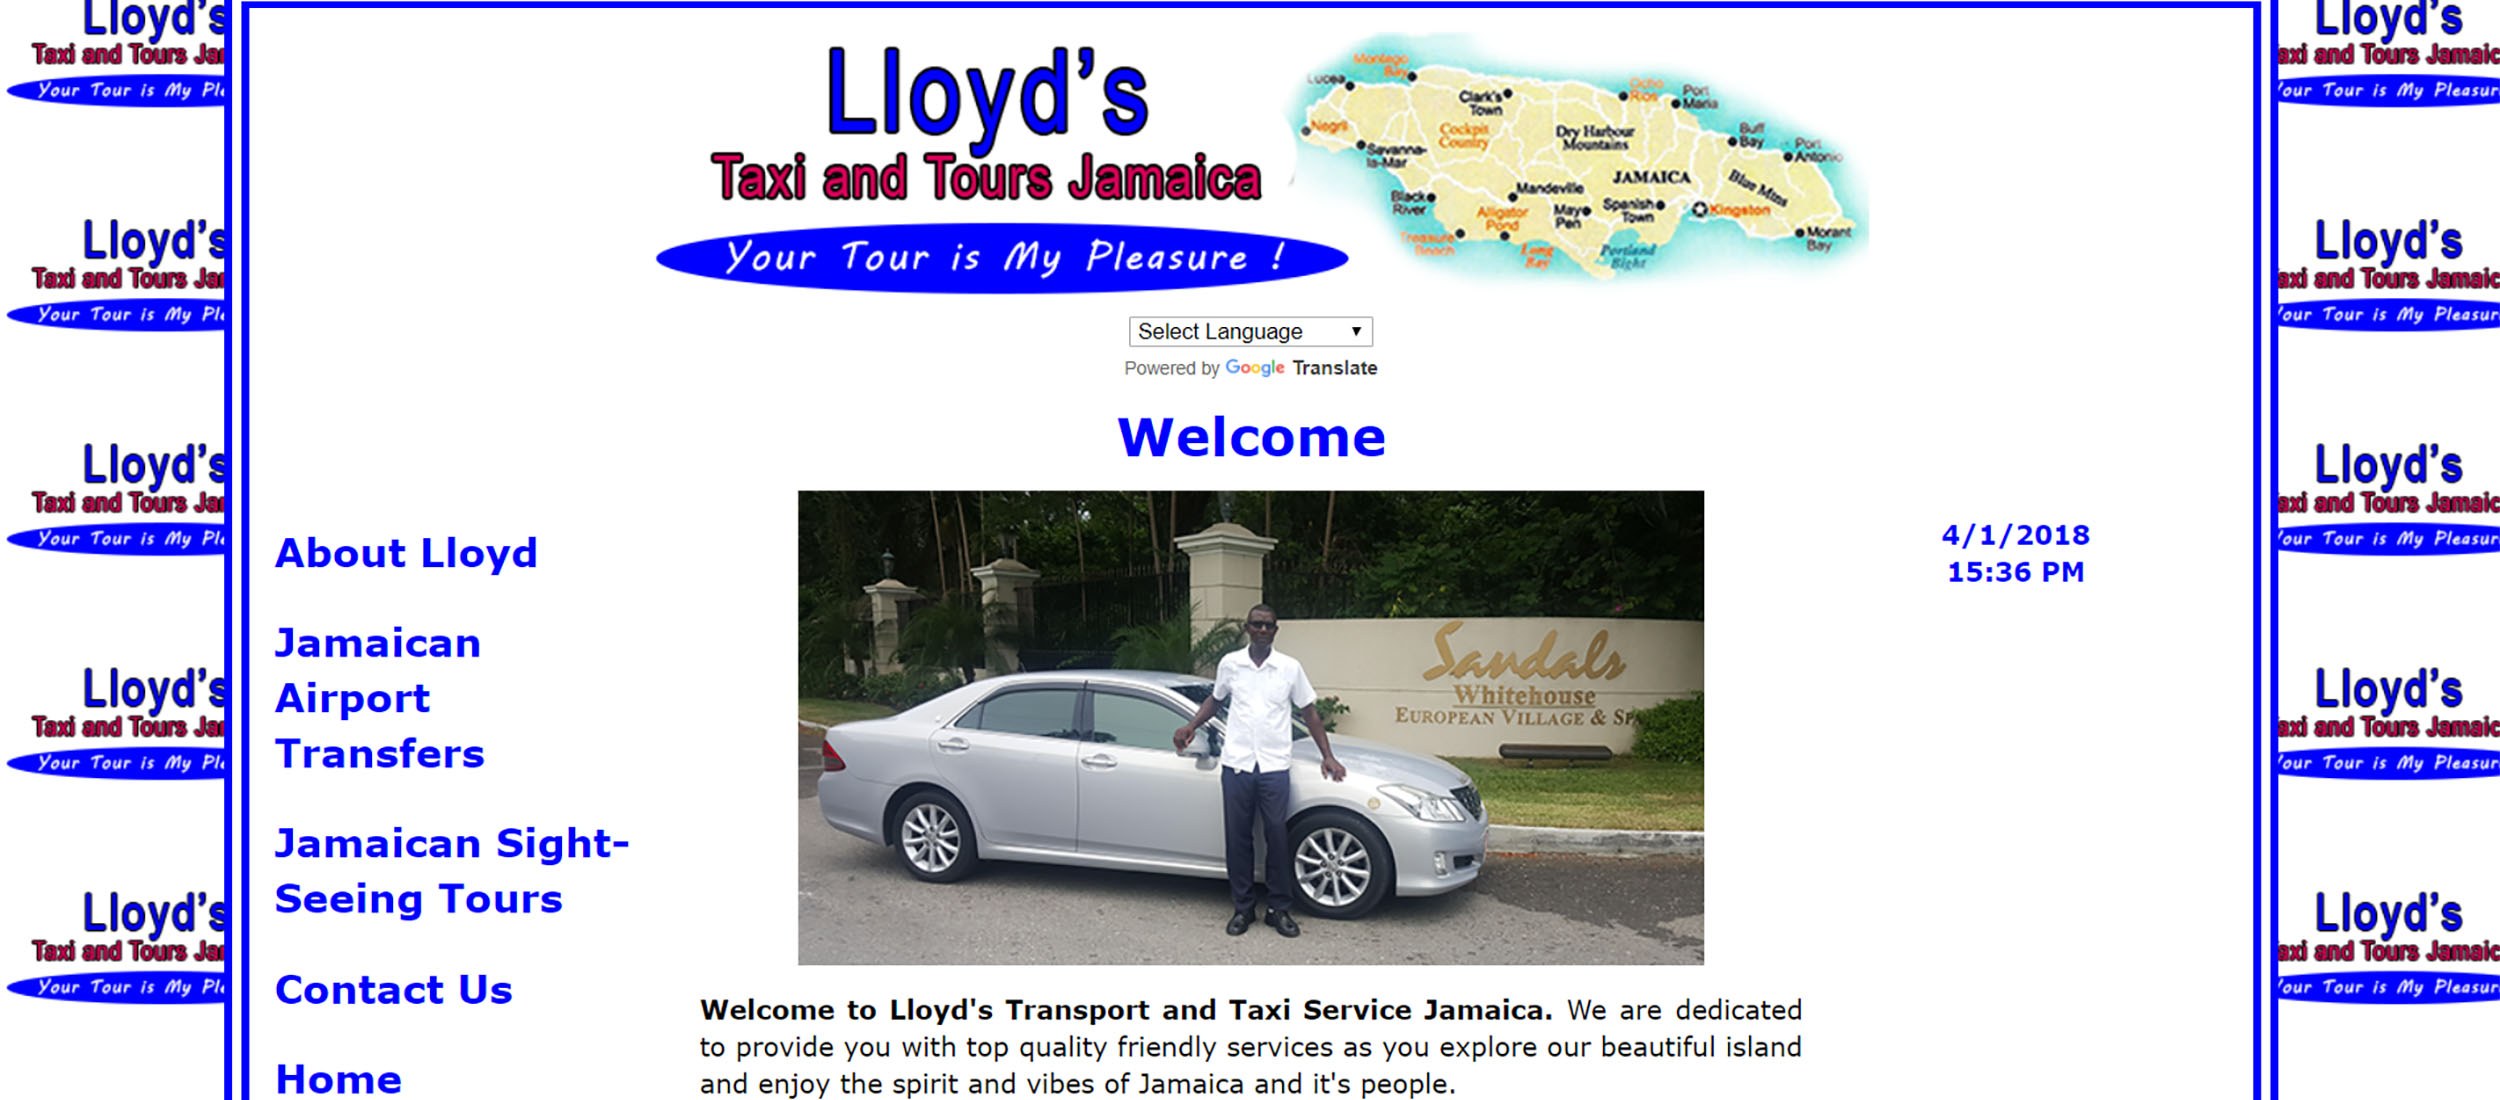 Lloyd's Taxi and Tours Jamaica by Barry J. Hough S.r